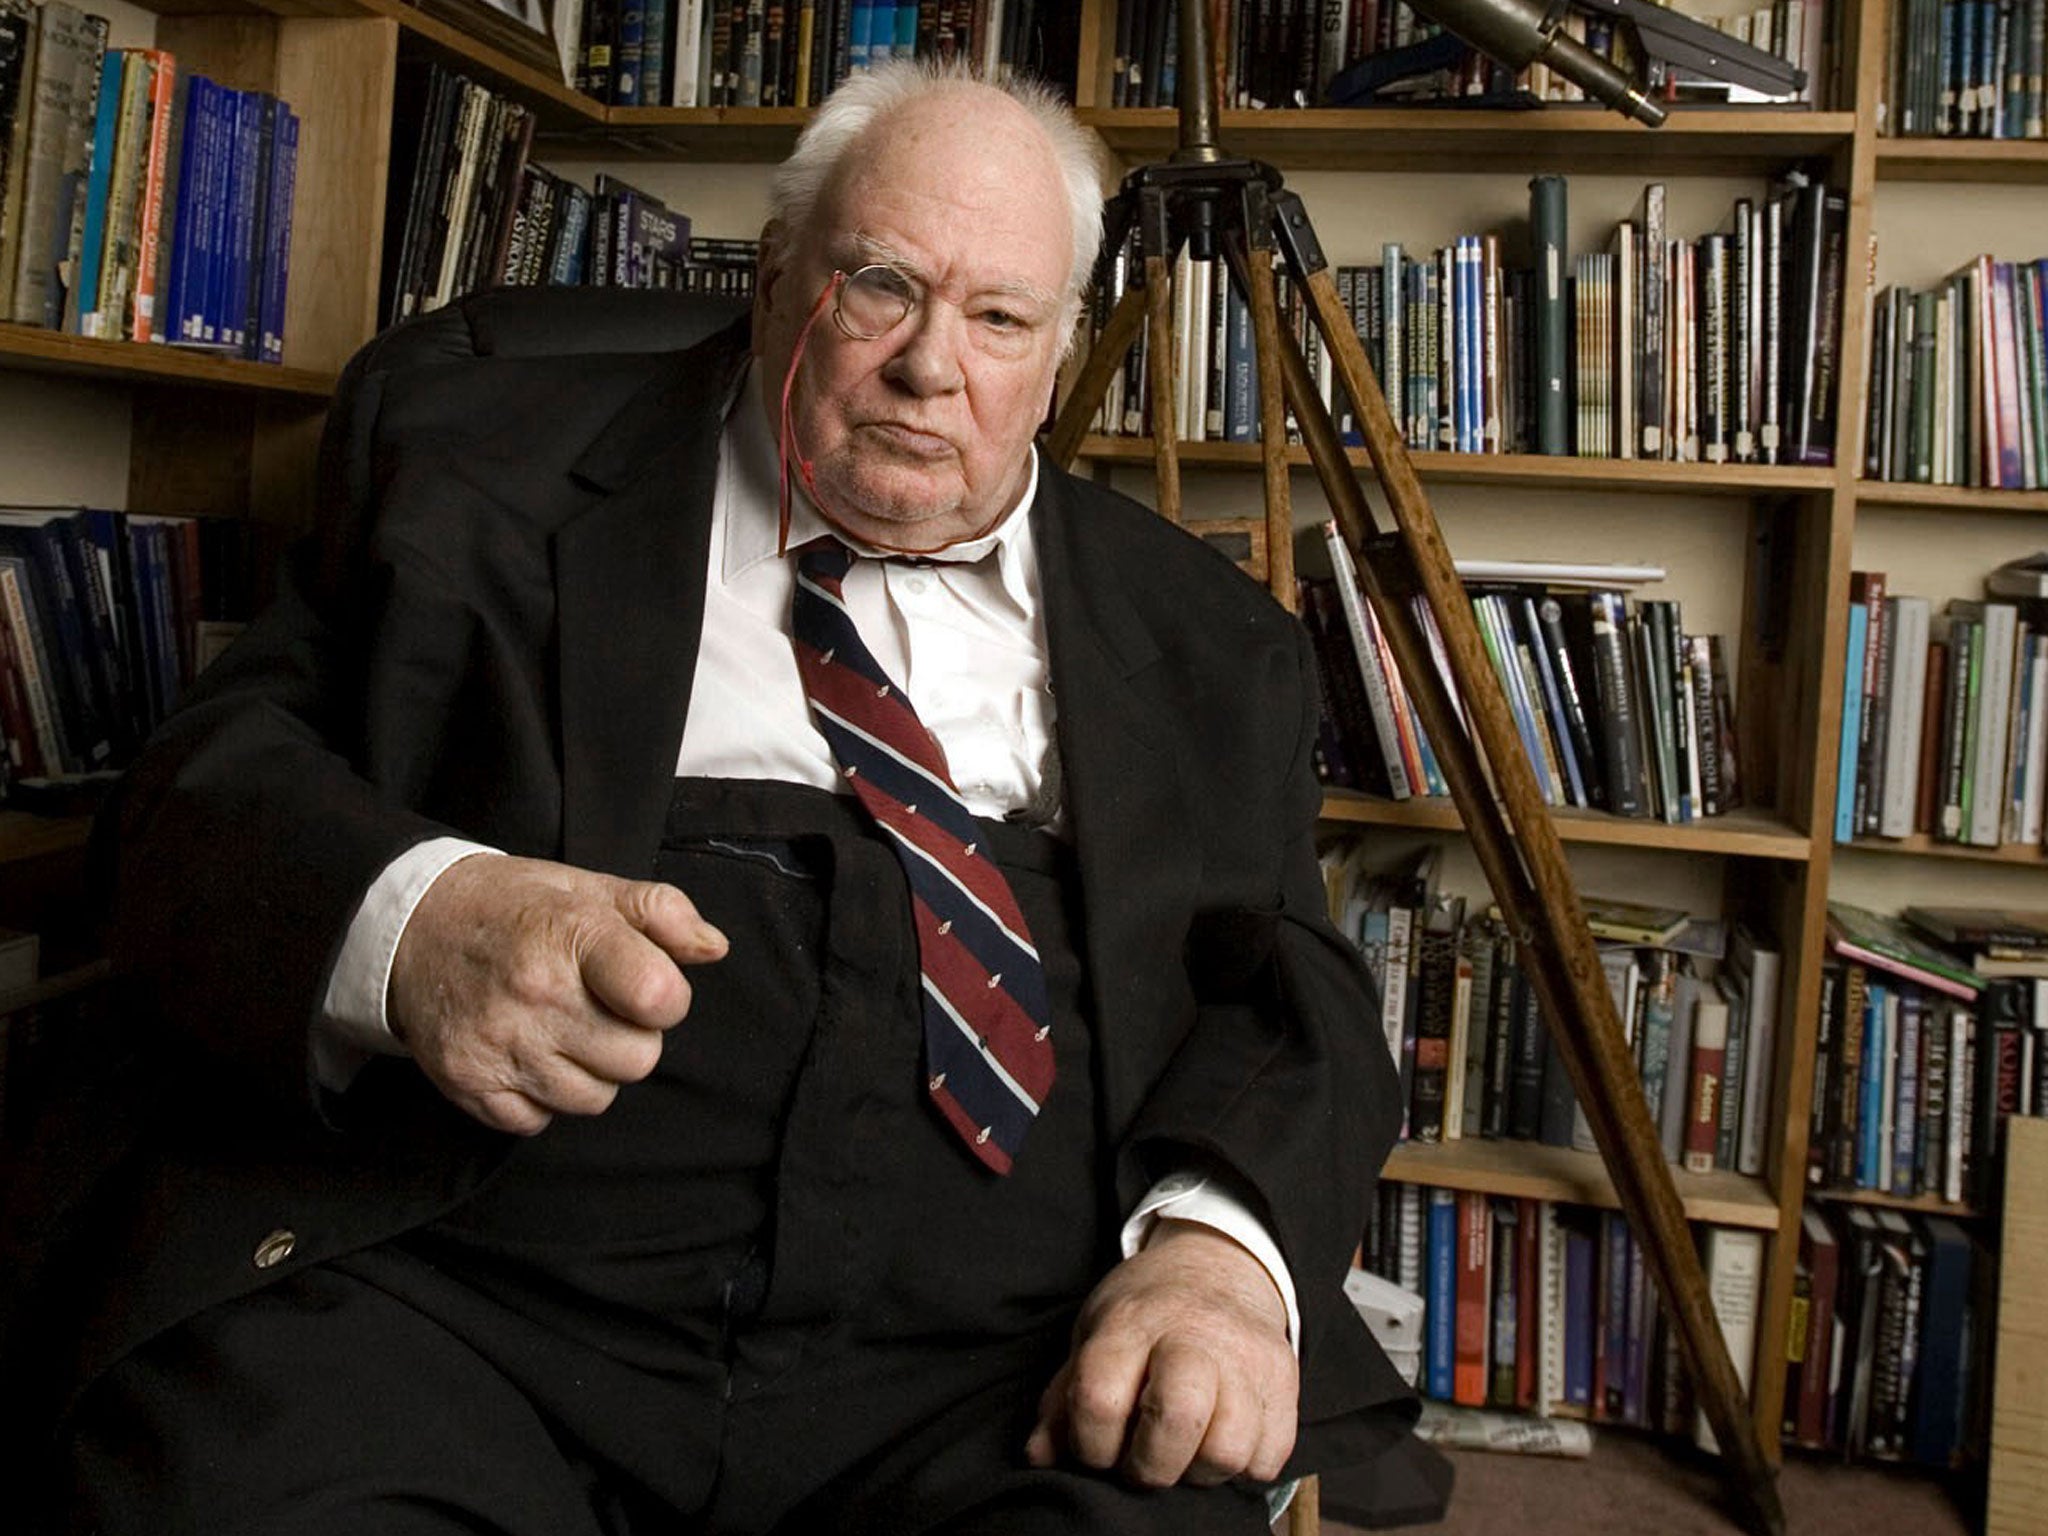 Star turn: Patrick Moore presented The Sky At Night for almost 56 years